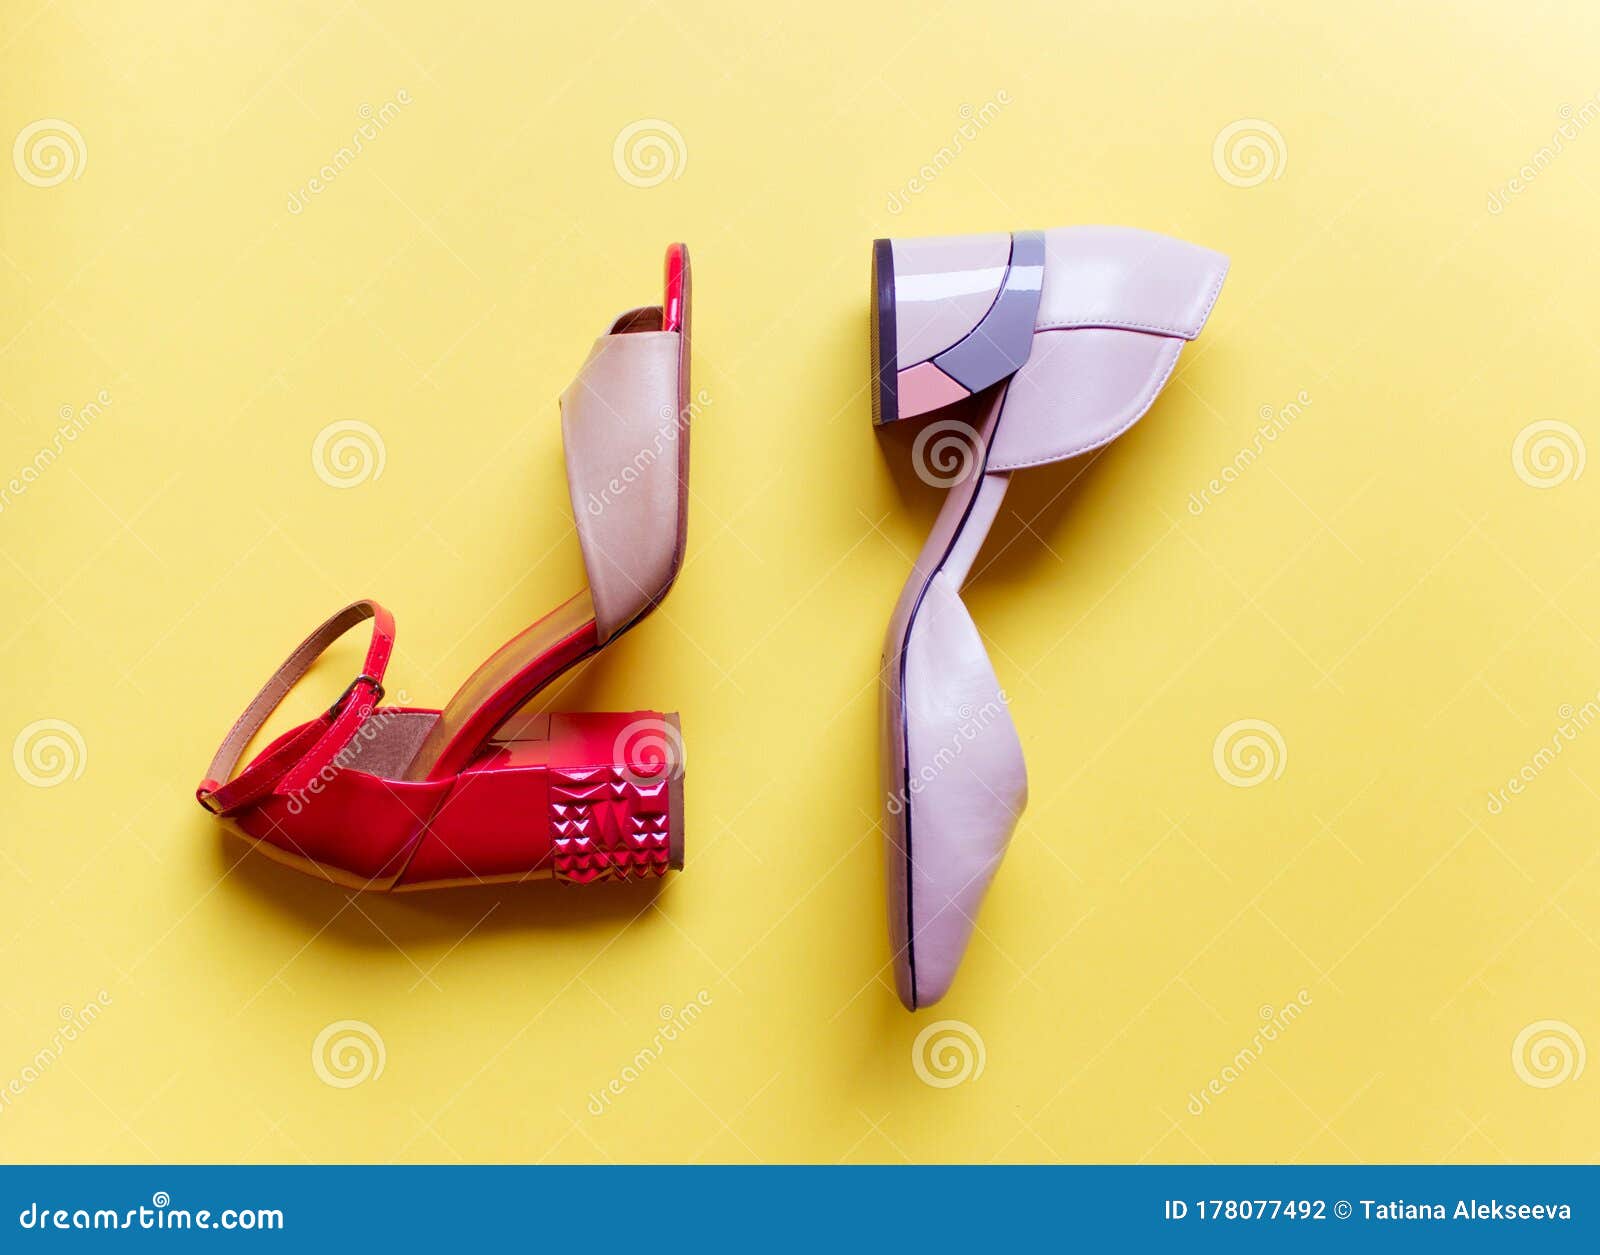 Pair of Pointy Shoes on Colorful Yellow Background. Free Copy Space ...